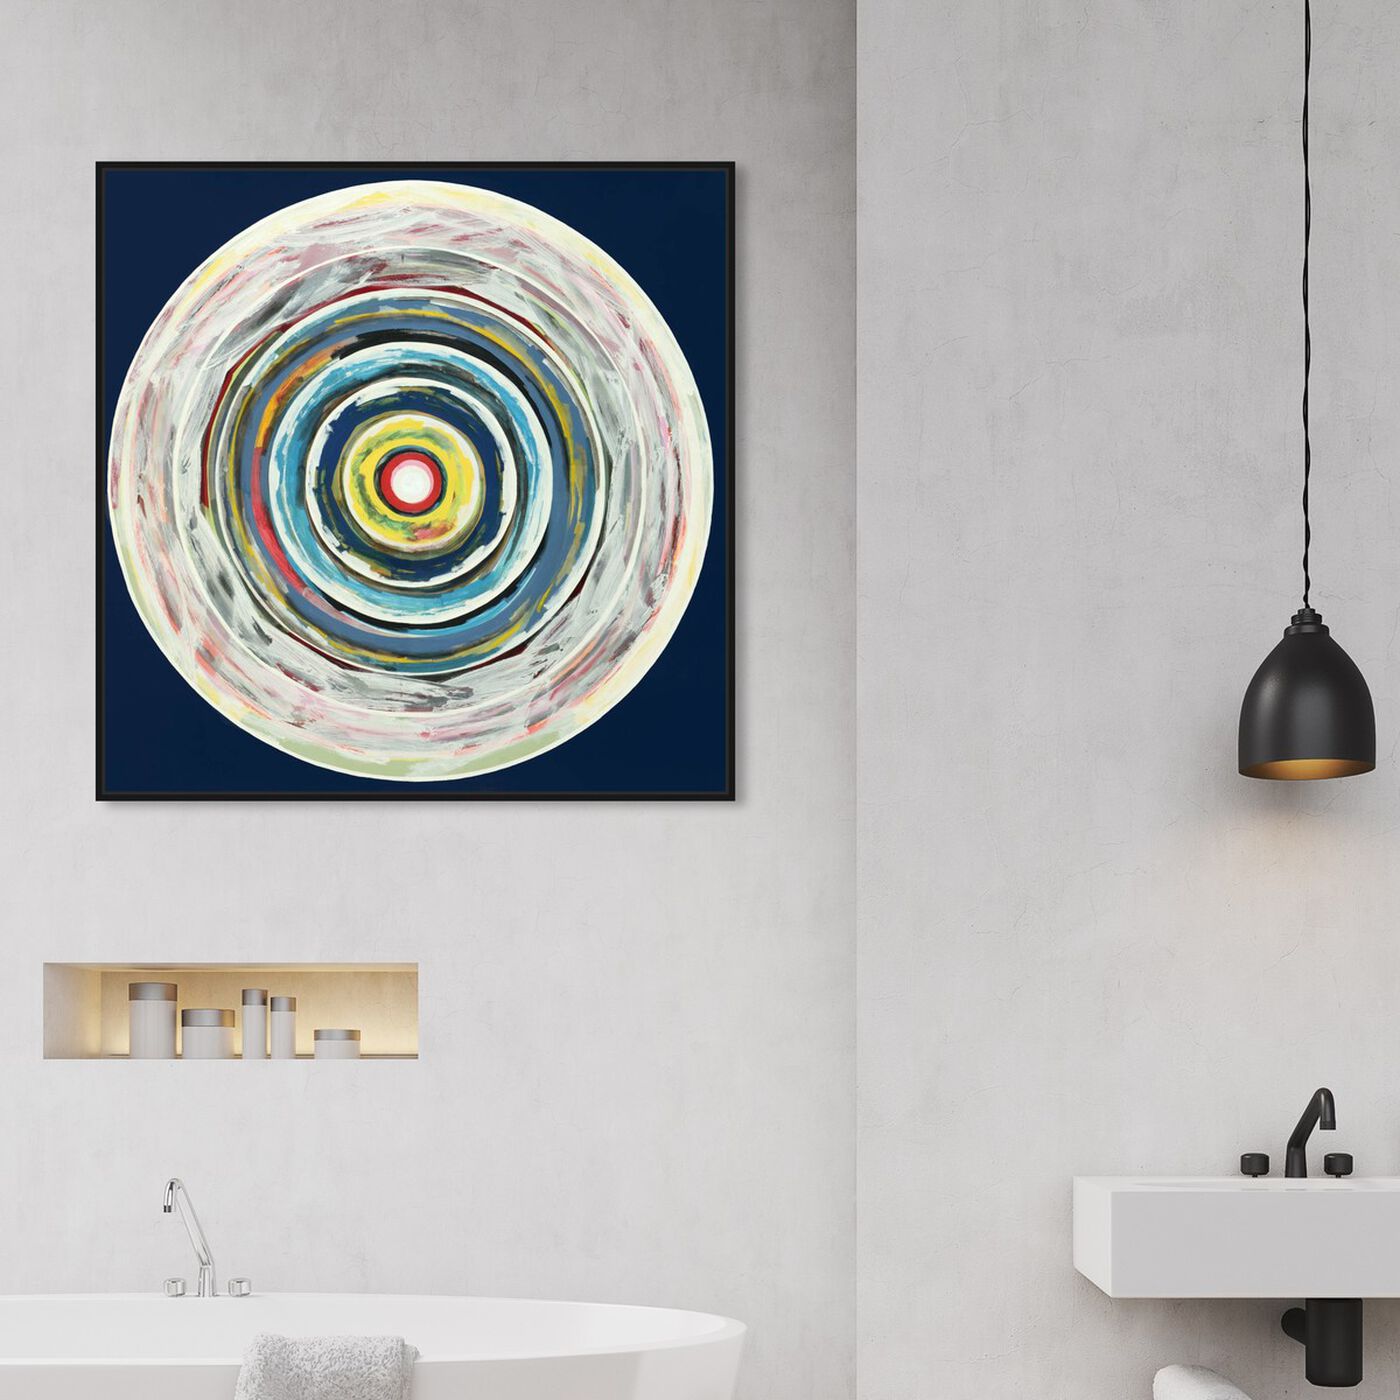 Hanging view of Sai - Pictis Spiralis 1NM1138 featuring abstract and paint art.